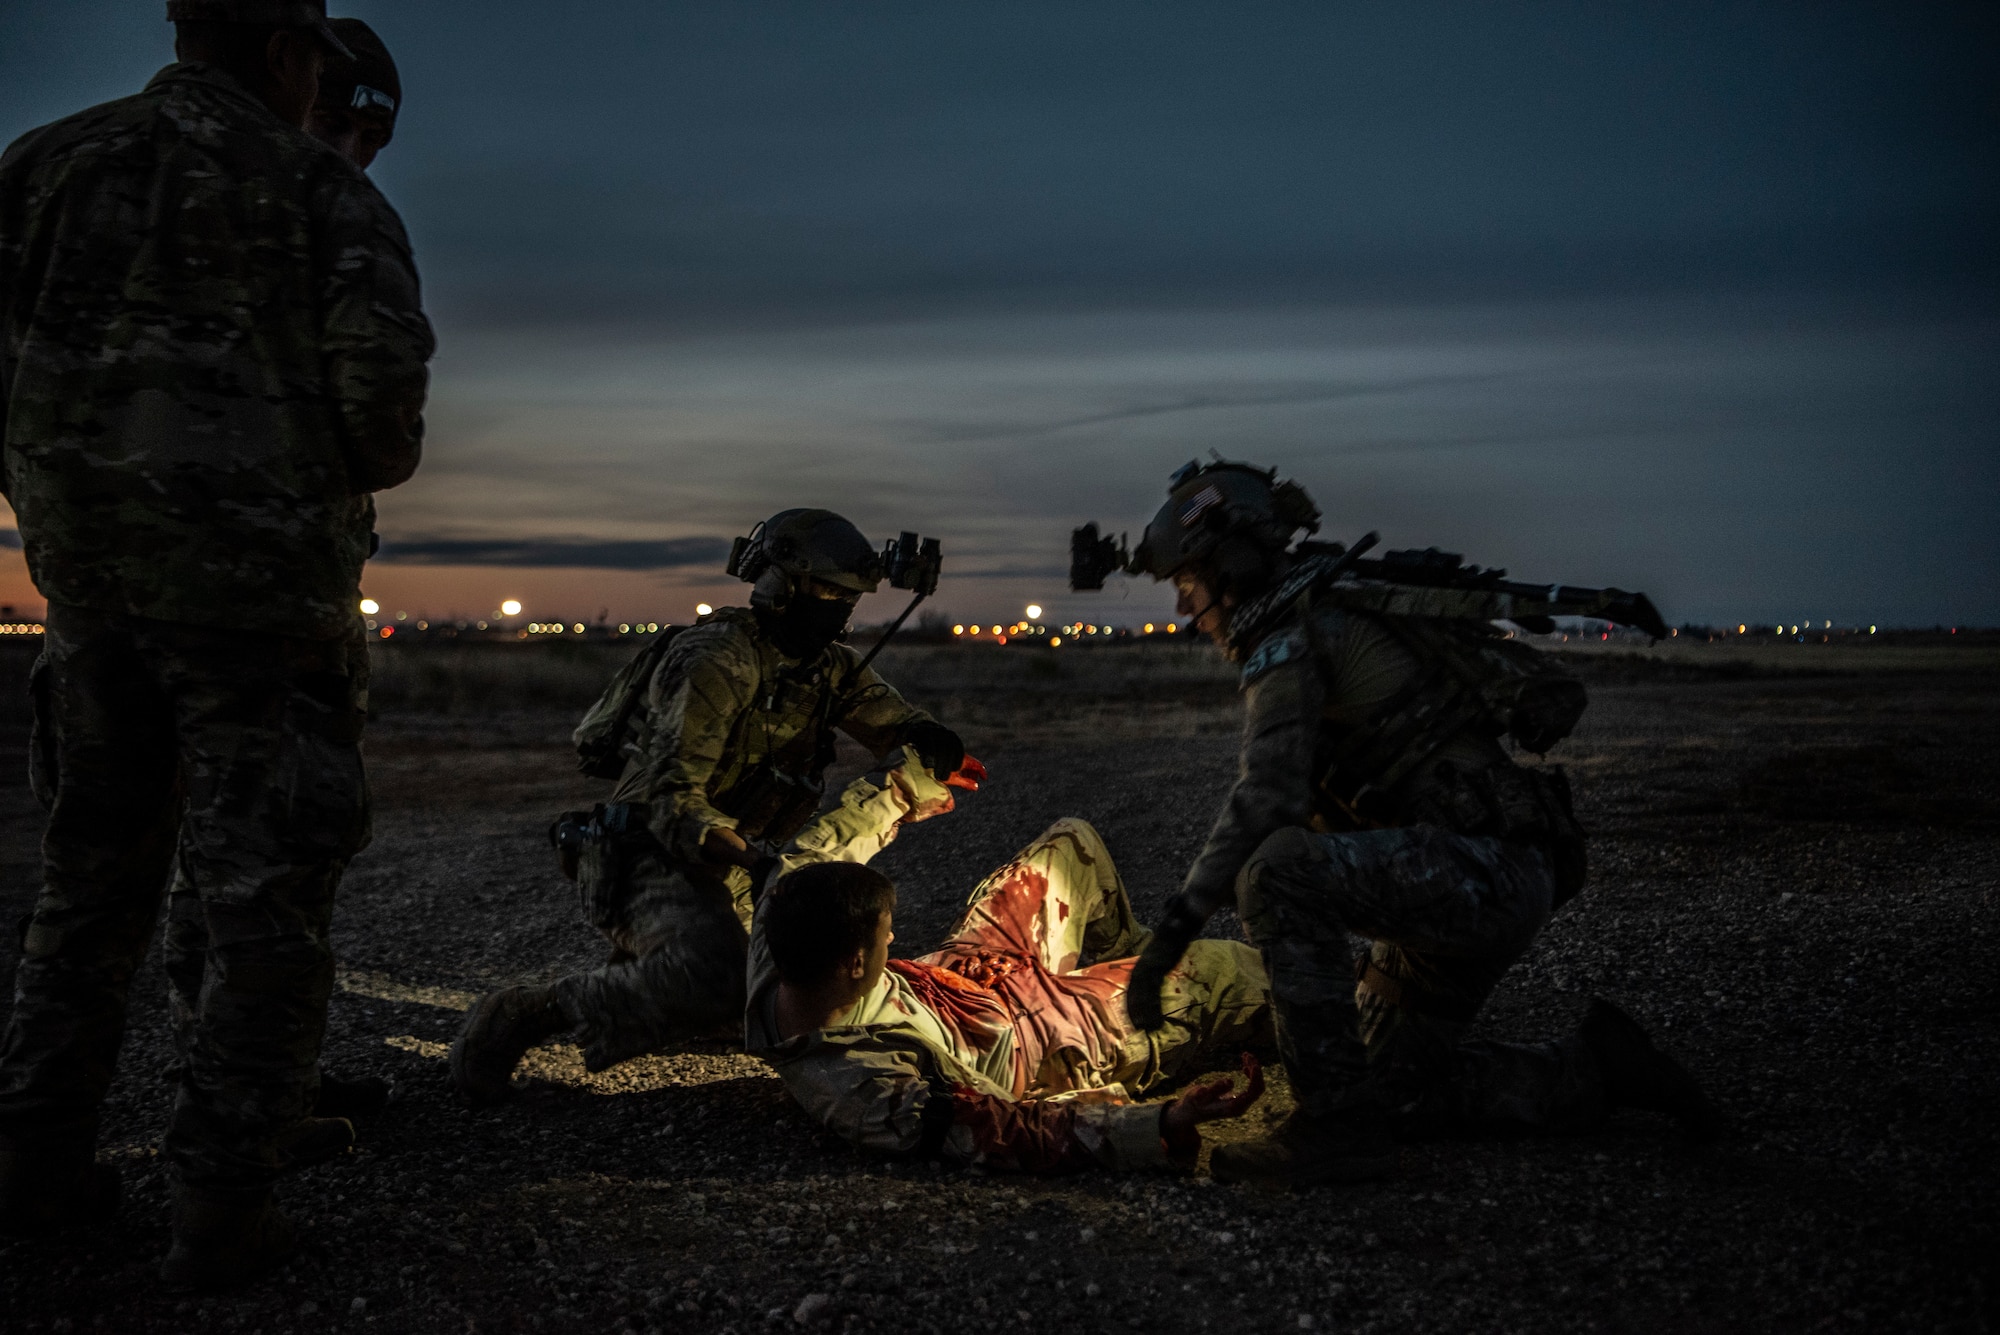 Security Forces Airmen from the 27th Special Operations Security Forces Squadron prepare to move a wounded Soldier to a safe location during a mass casualty exercise at Cannon Air Force Base, N.M., Jan. 14, 2019. The 27th SOSFS participated in a mass casualty exercise with medical personnel to train on clearing hostile locations, while escorting wounded Soldiers to safety. (U.S. Air Force photo by Airman 1st Class Gage Daniel)